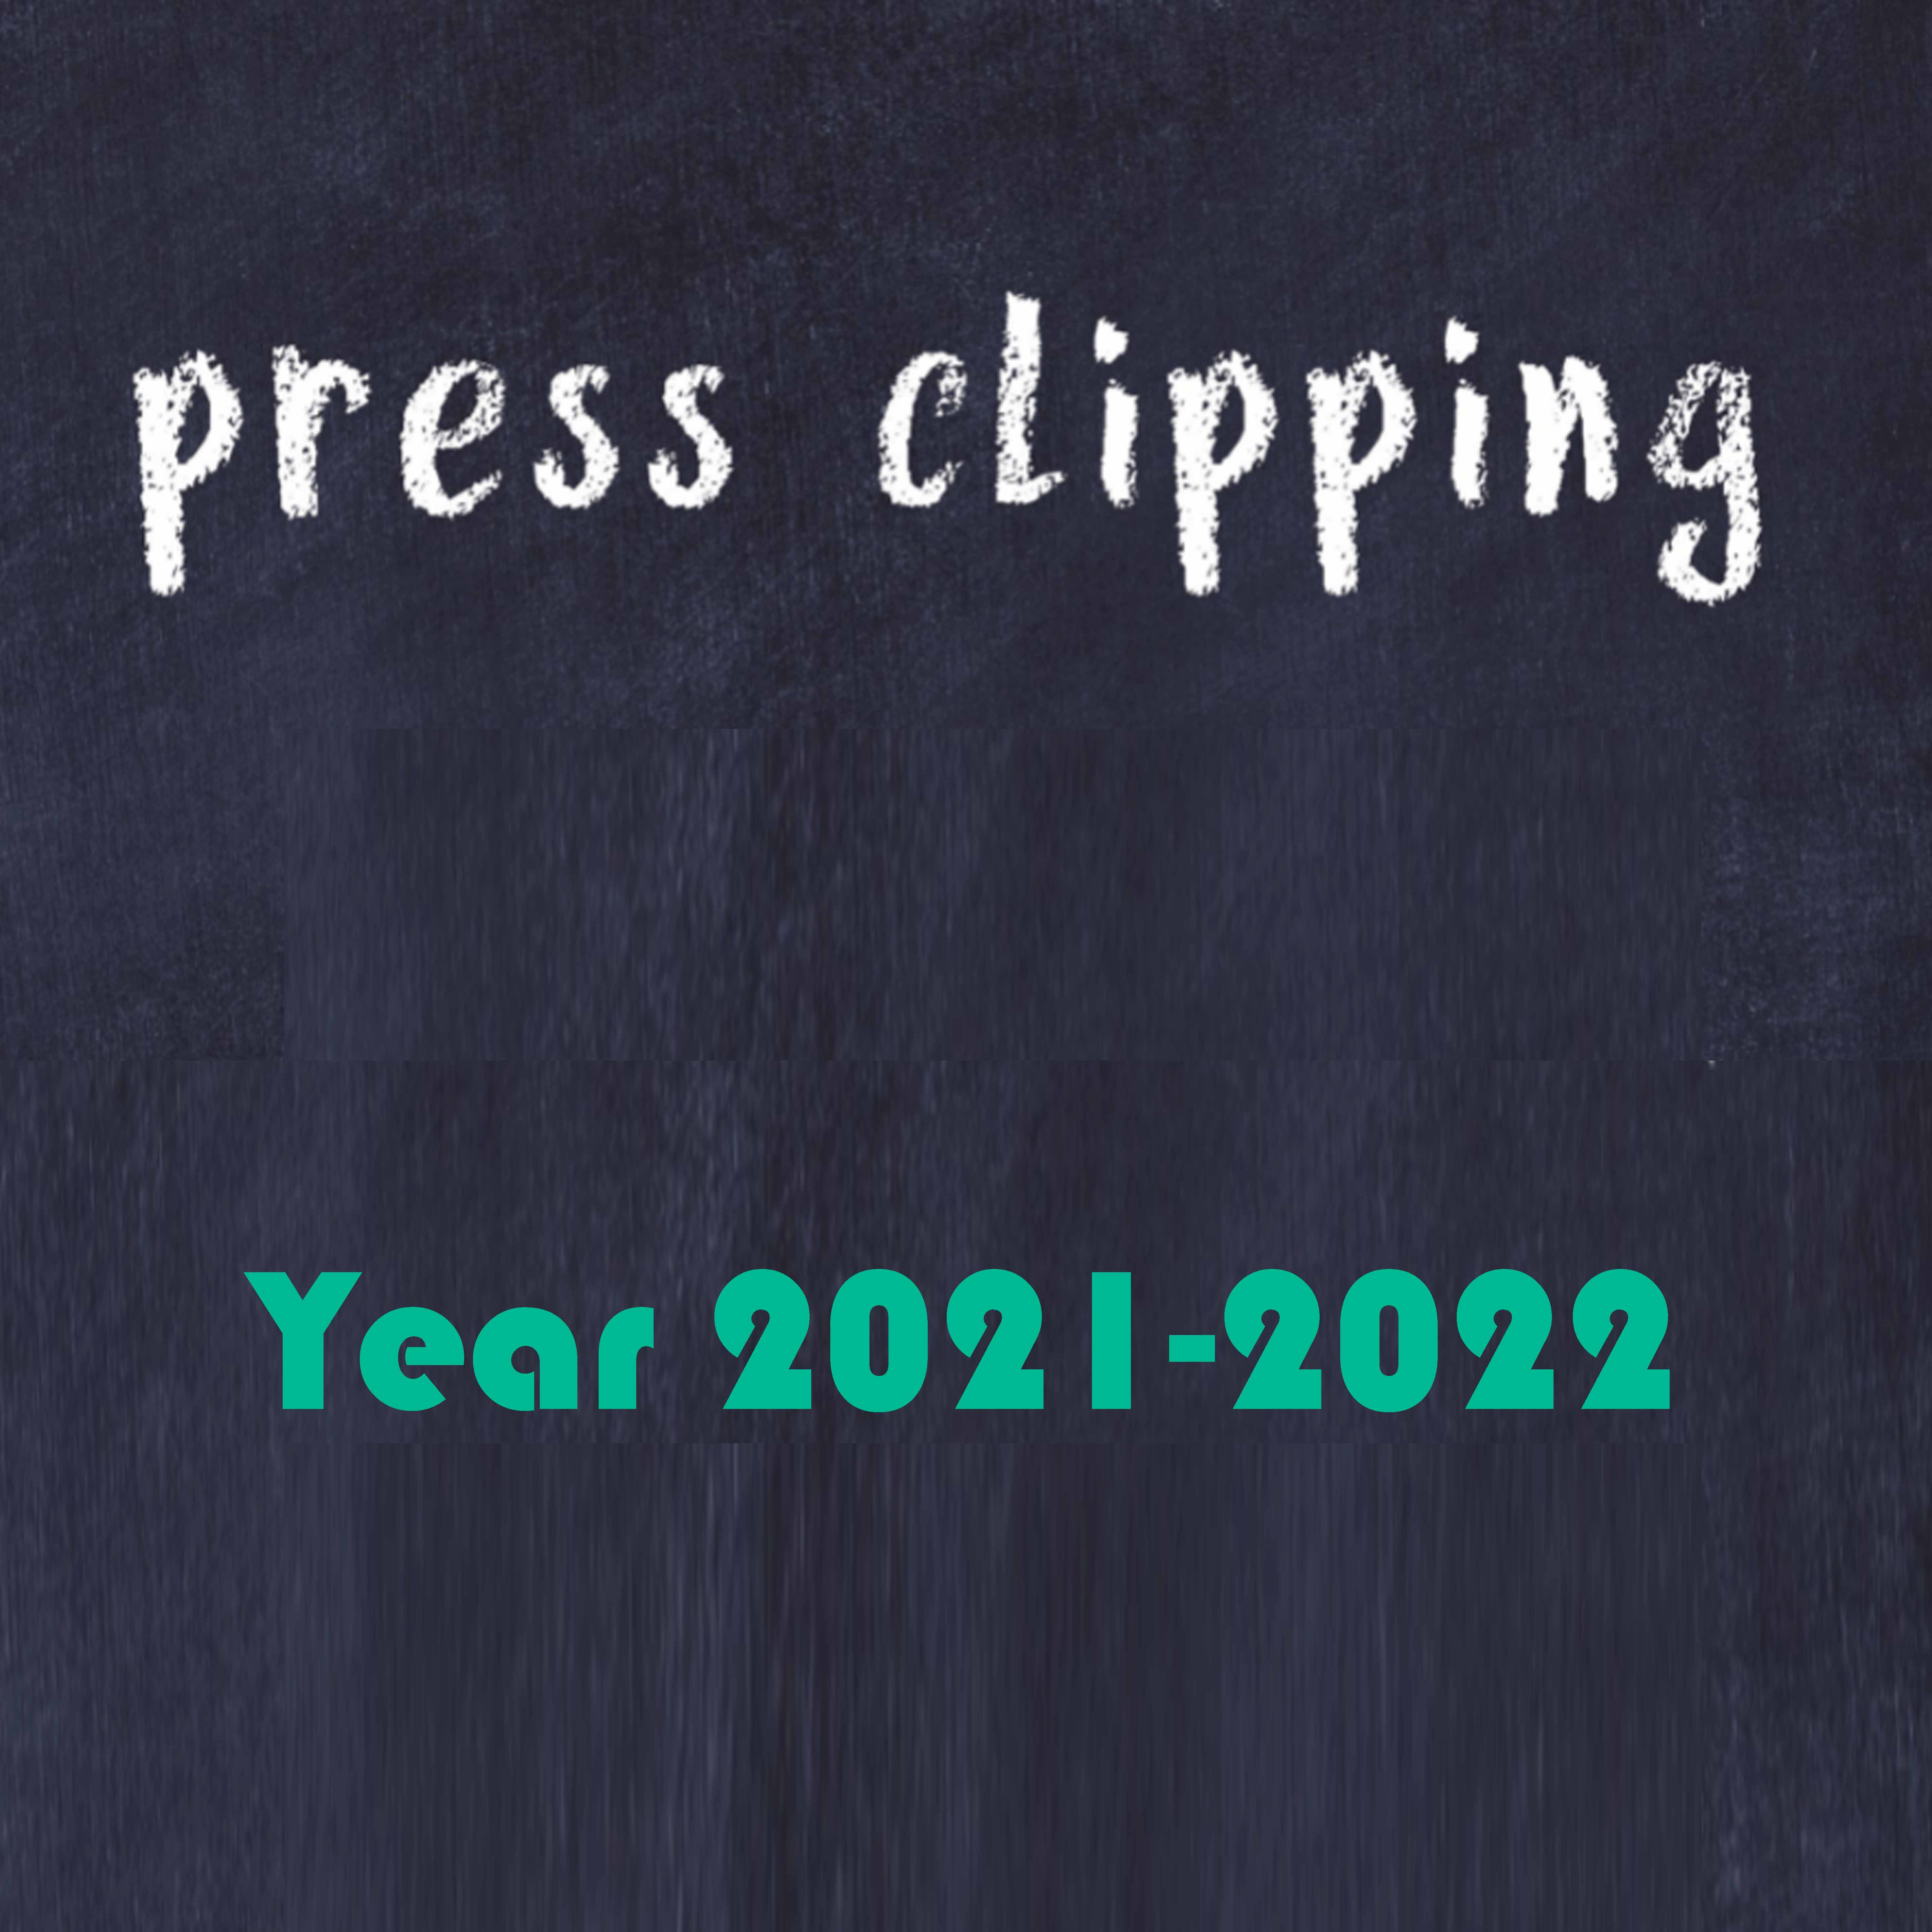 Press Clippings Year 2021-22